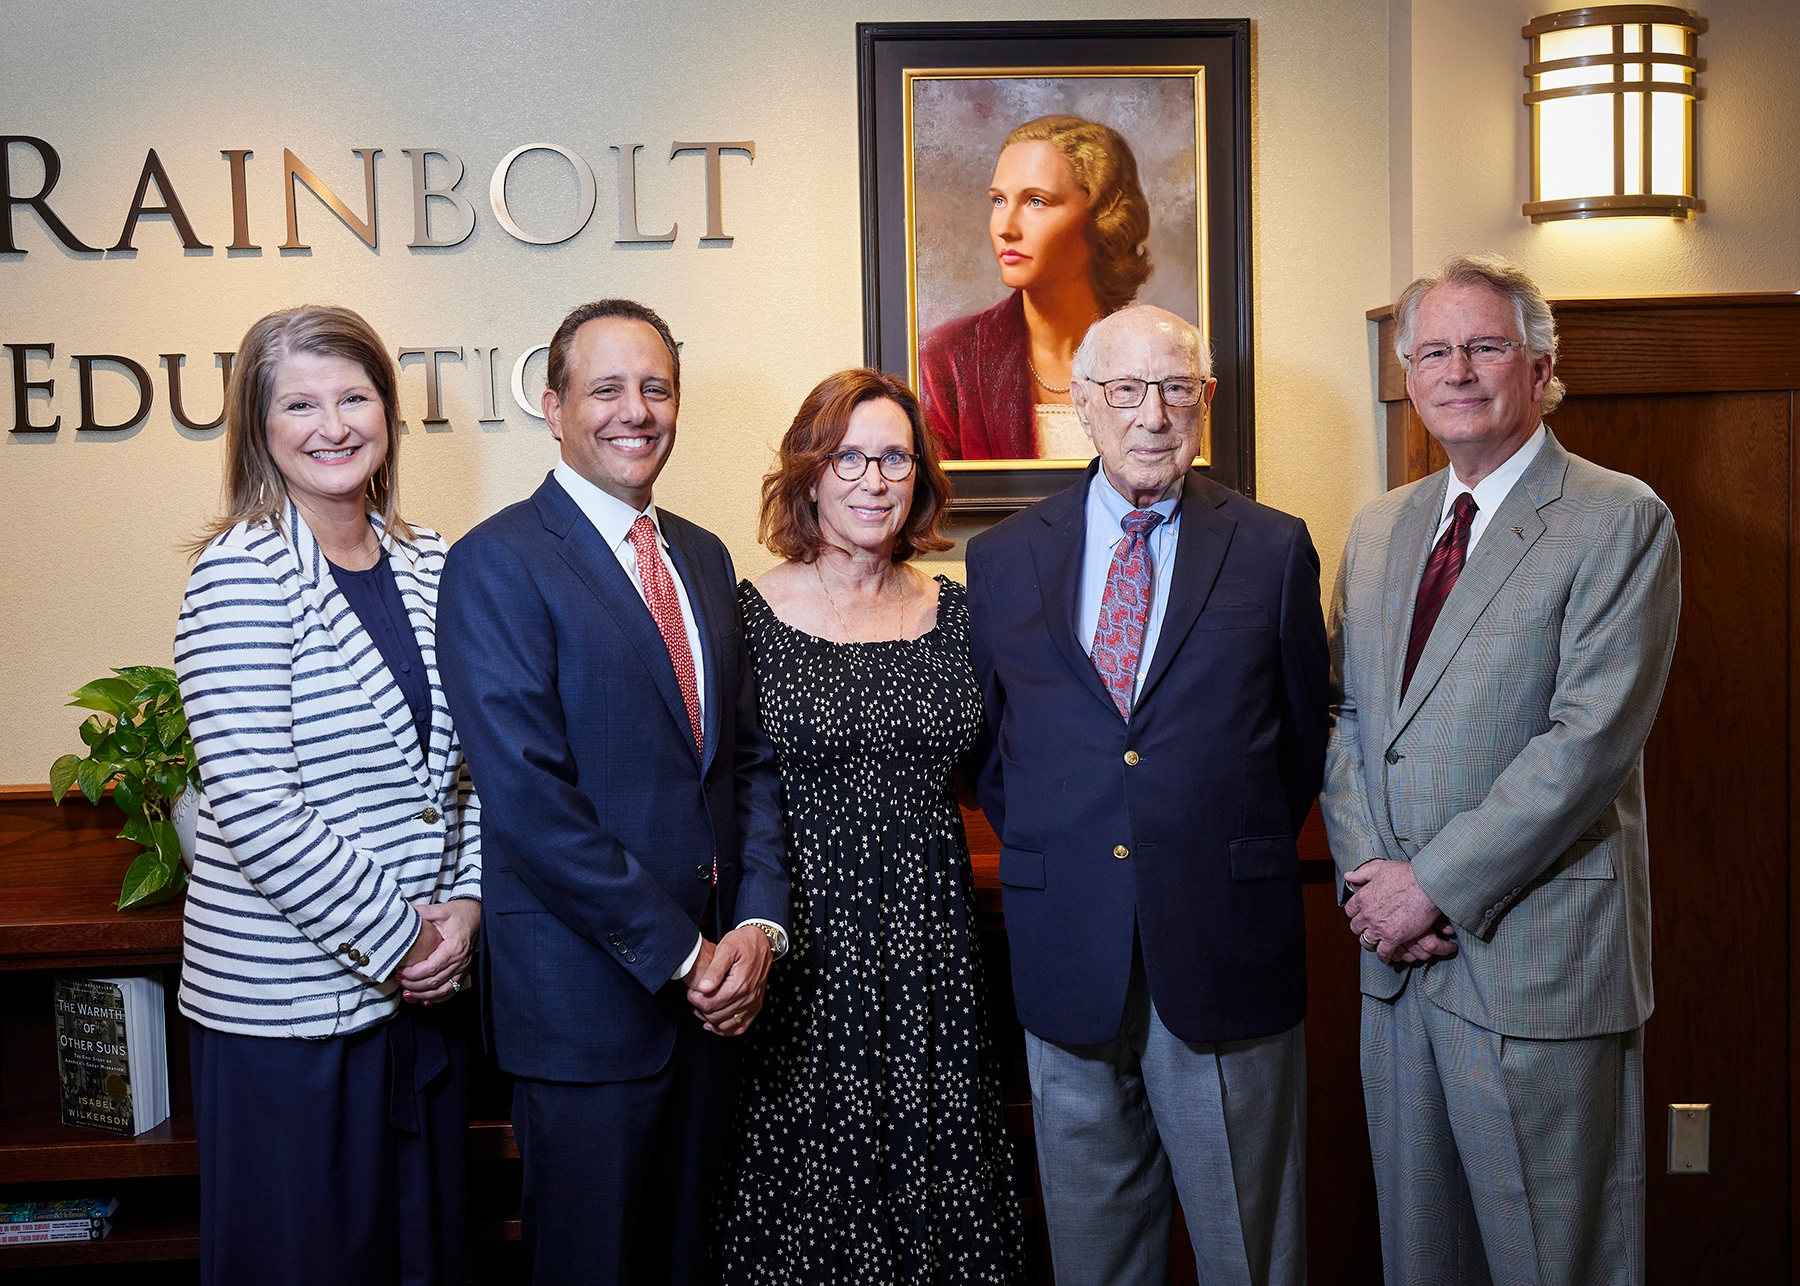 Two women and three men standing together in front of Jeannine Rainbolt portrait